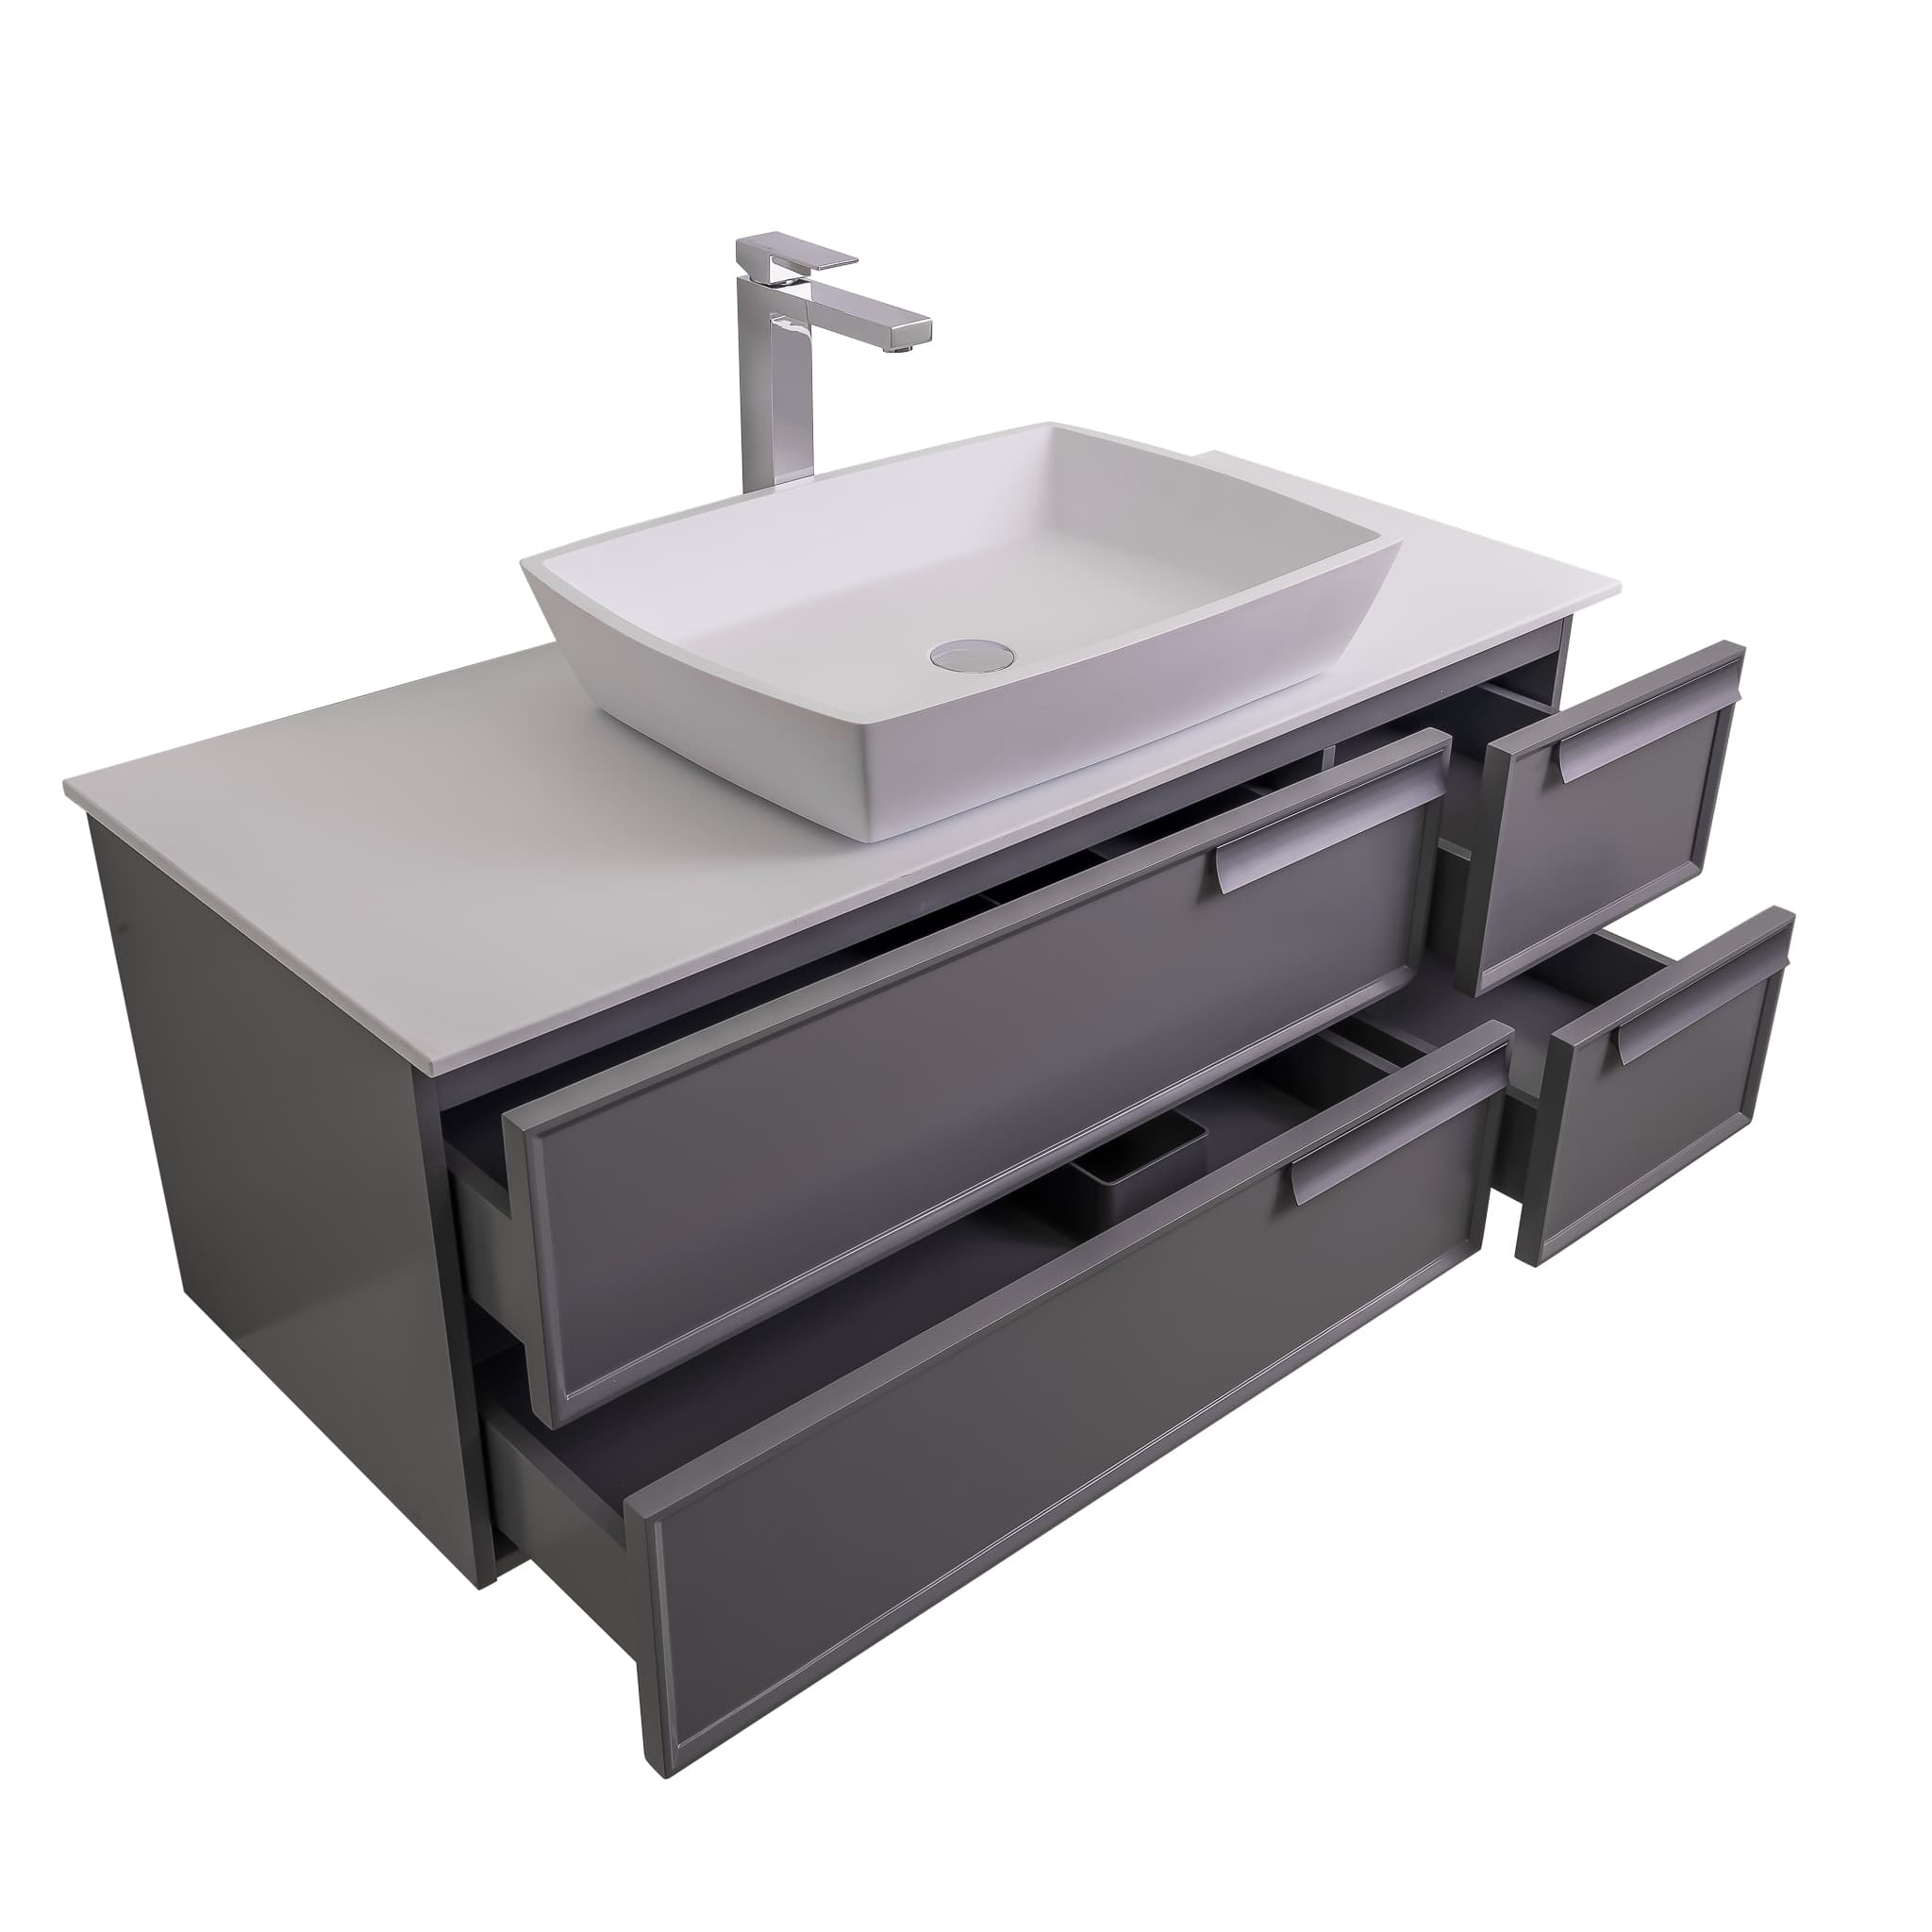 Garda 47.5 Matte Grey Cabinet, Solid Surface Flat White Counter and Square Solid Surface White Basin 1316, Wall Mounted Modern Vanity Set